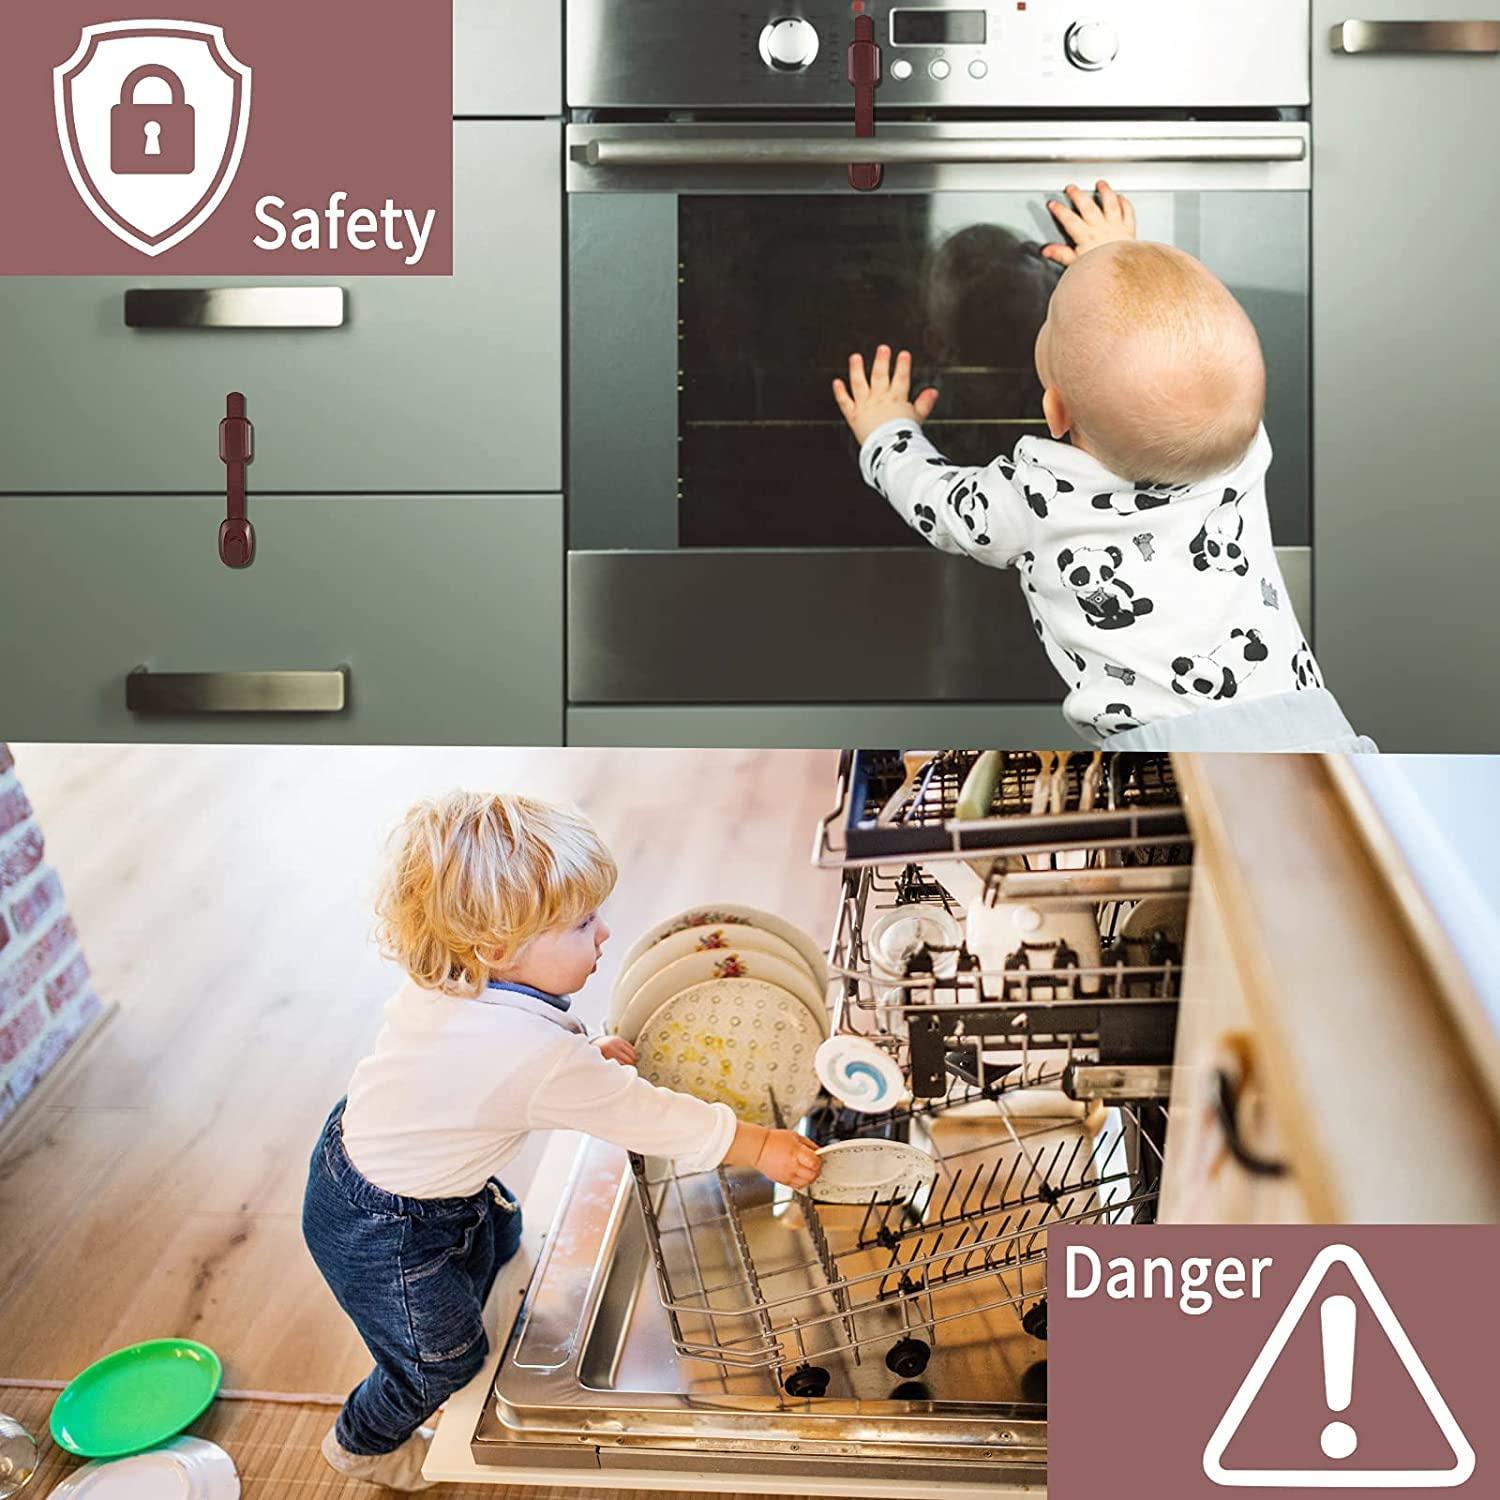 Baby Proofing Cabinet Lock Brown Child Safety Latches Lock with 3M  Adhesive, No Drilling Childproofing Safety Strap Locks for Cabinets, Oven,  Fridge, Drawers, Dishwasher, Toilet Seat 4 PACK Brown